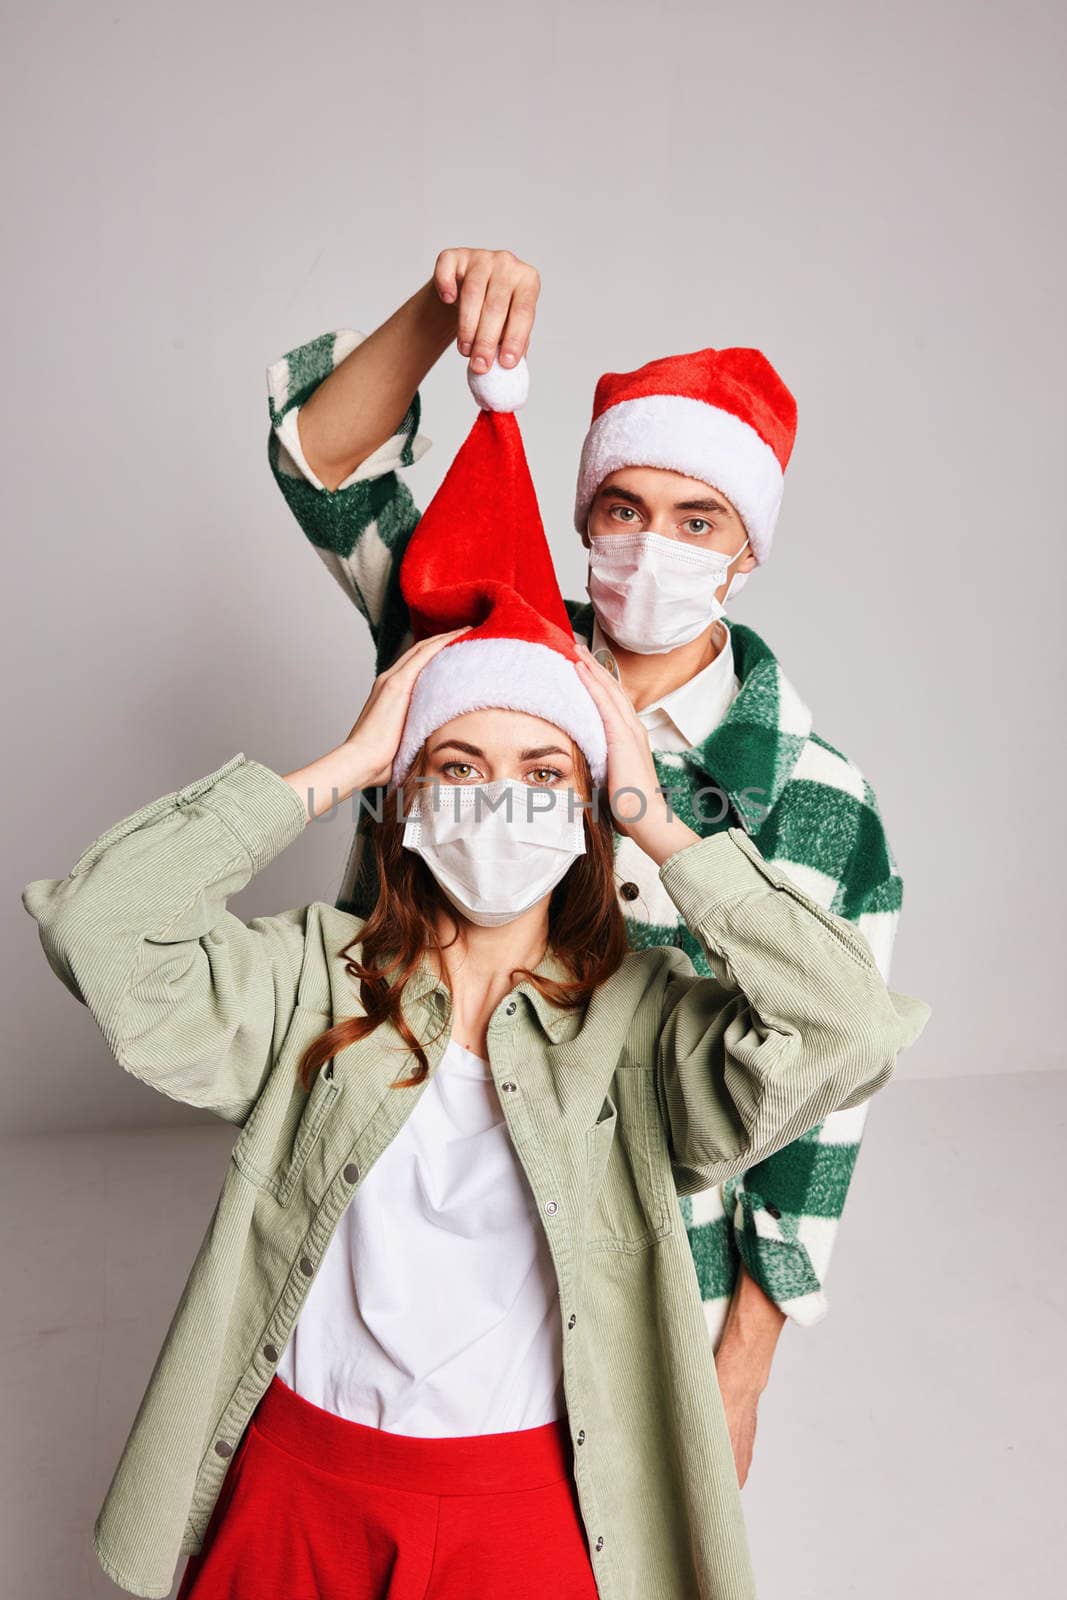 Married couple Christmas fun holiday medical masks. High quality photo